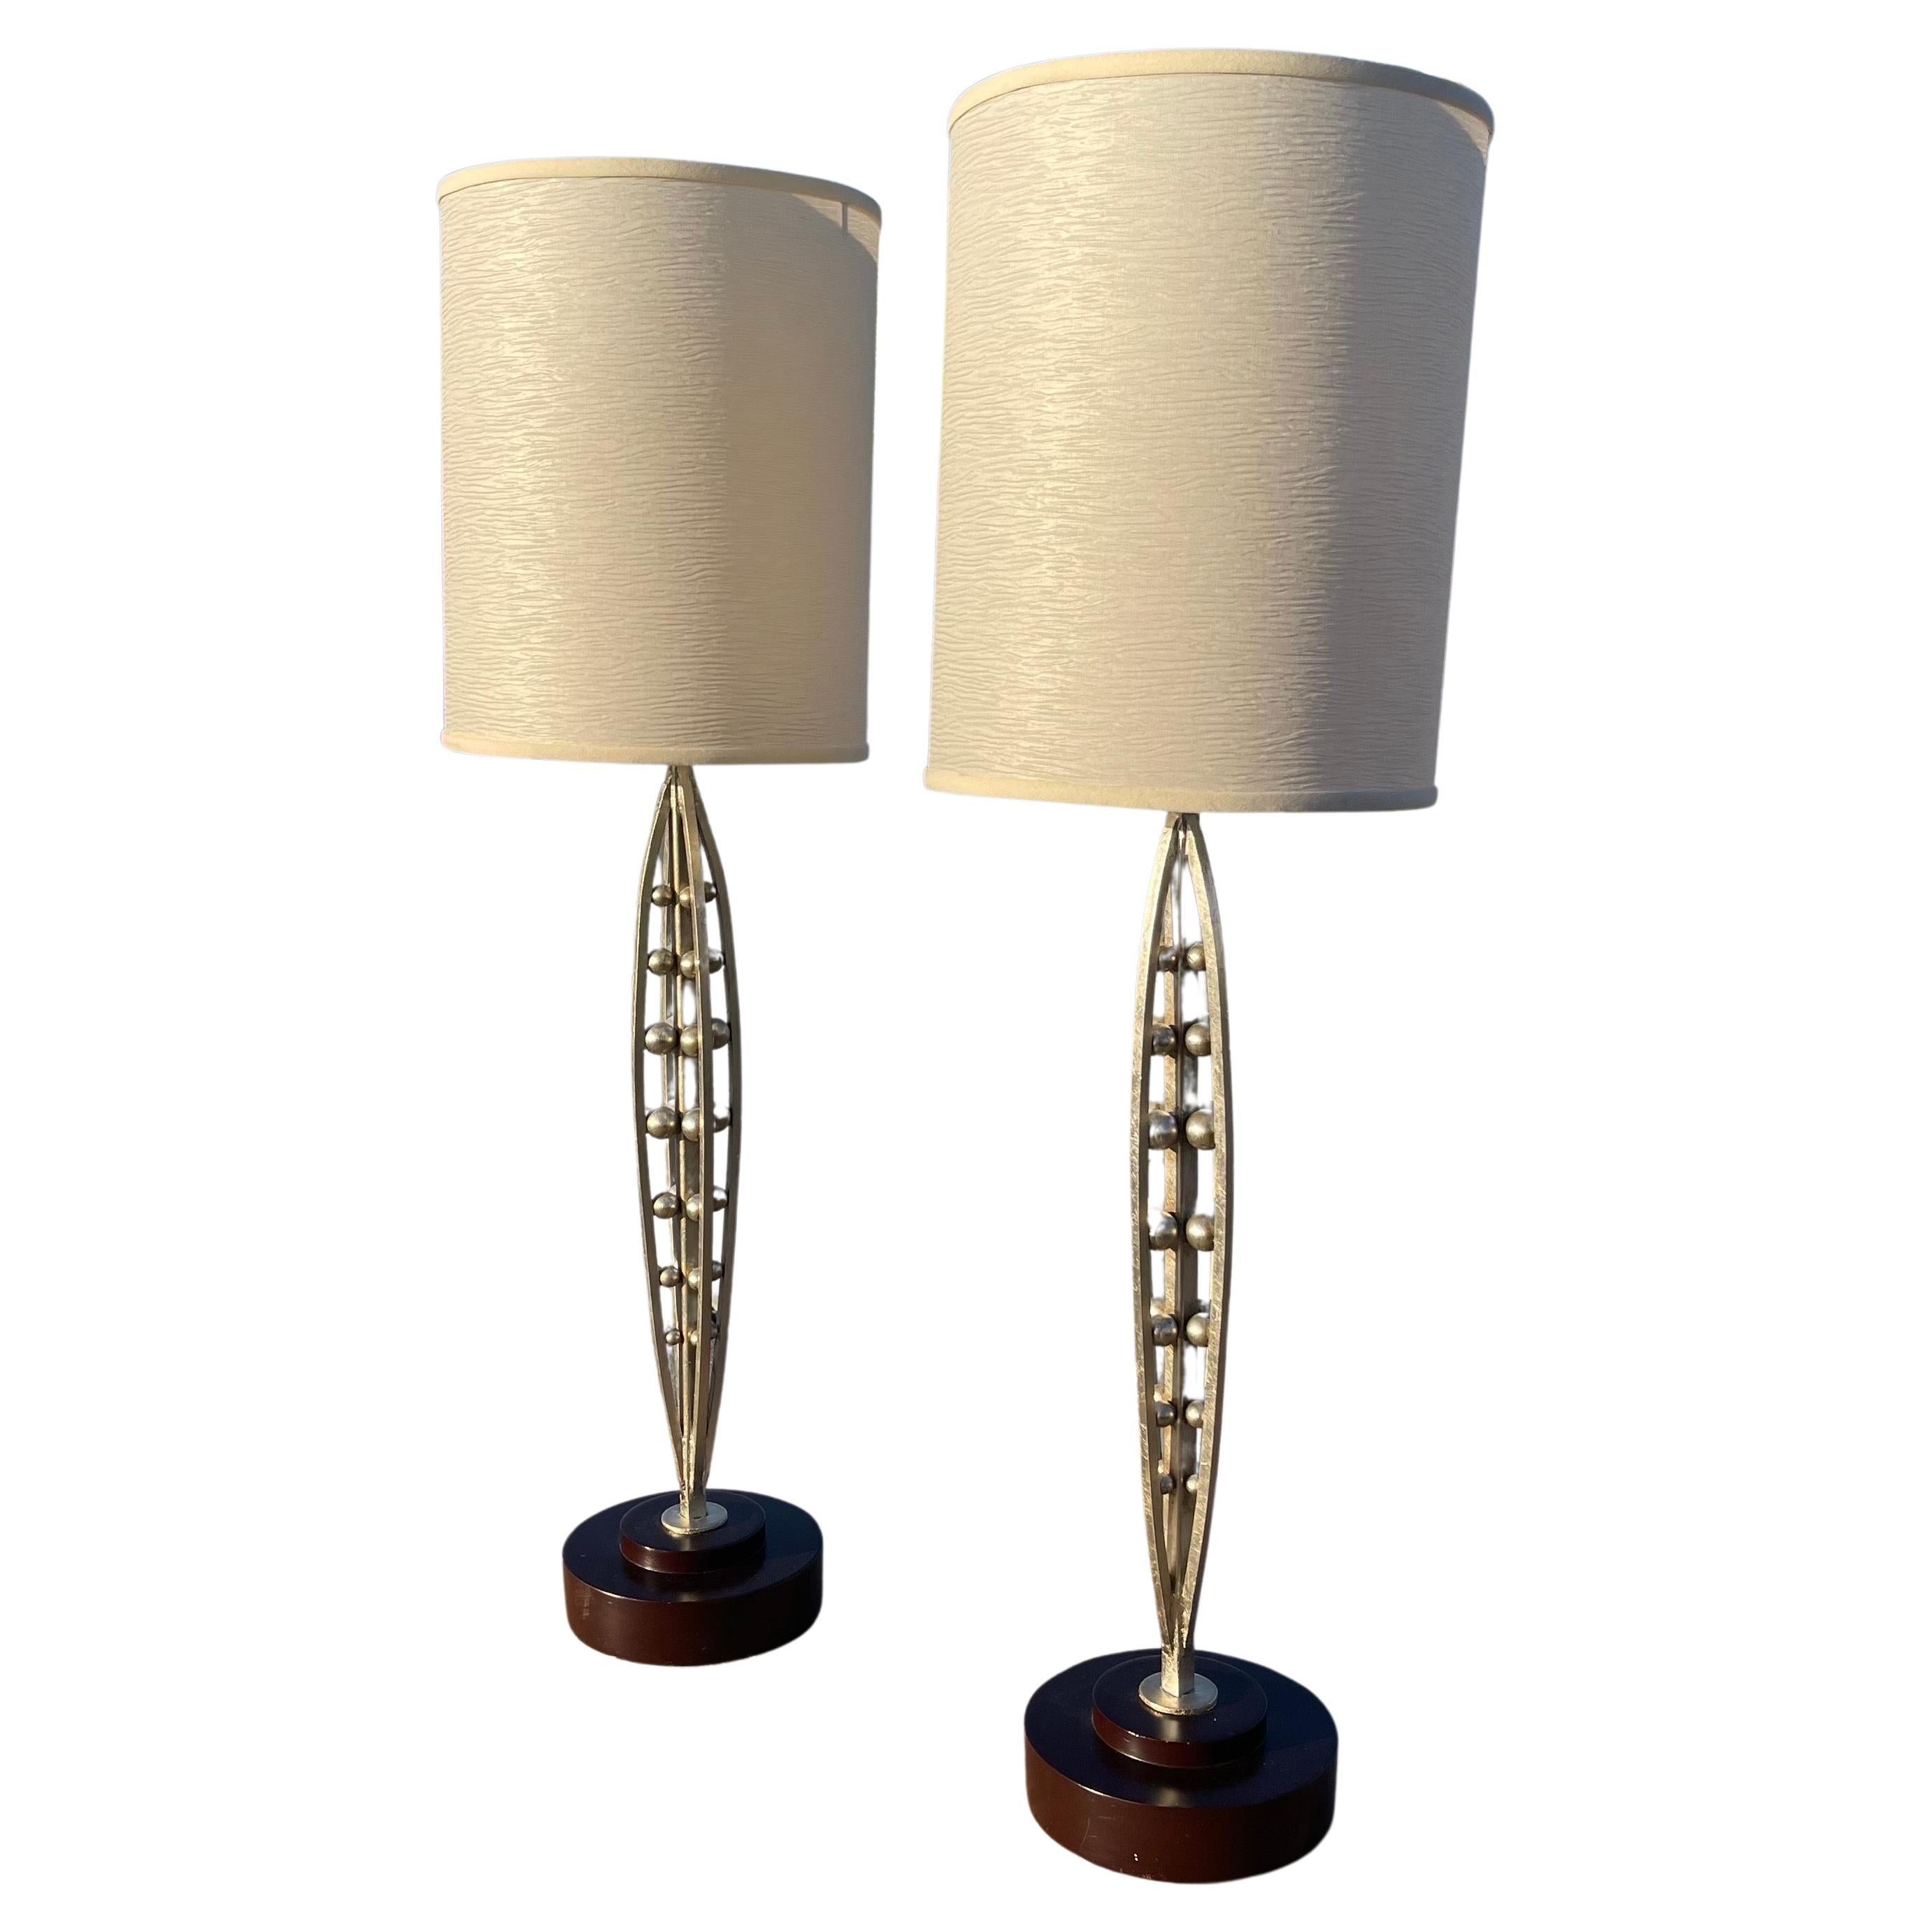 Fine Art Lamps Miami y2k Futurism Silver Leaf Gilt Ball Table Lamps, a Pair For Sale